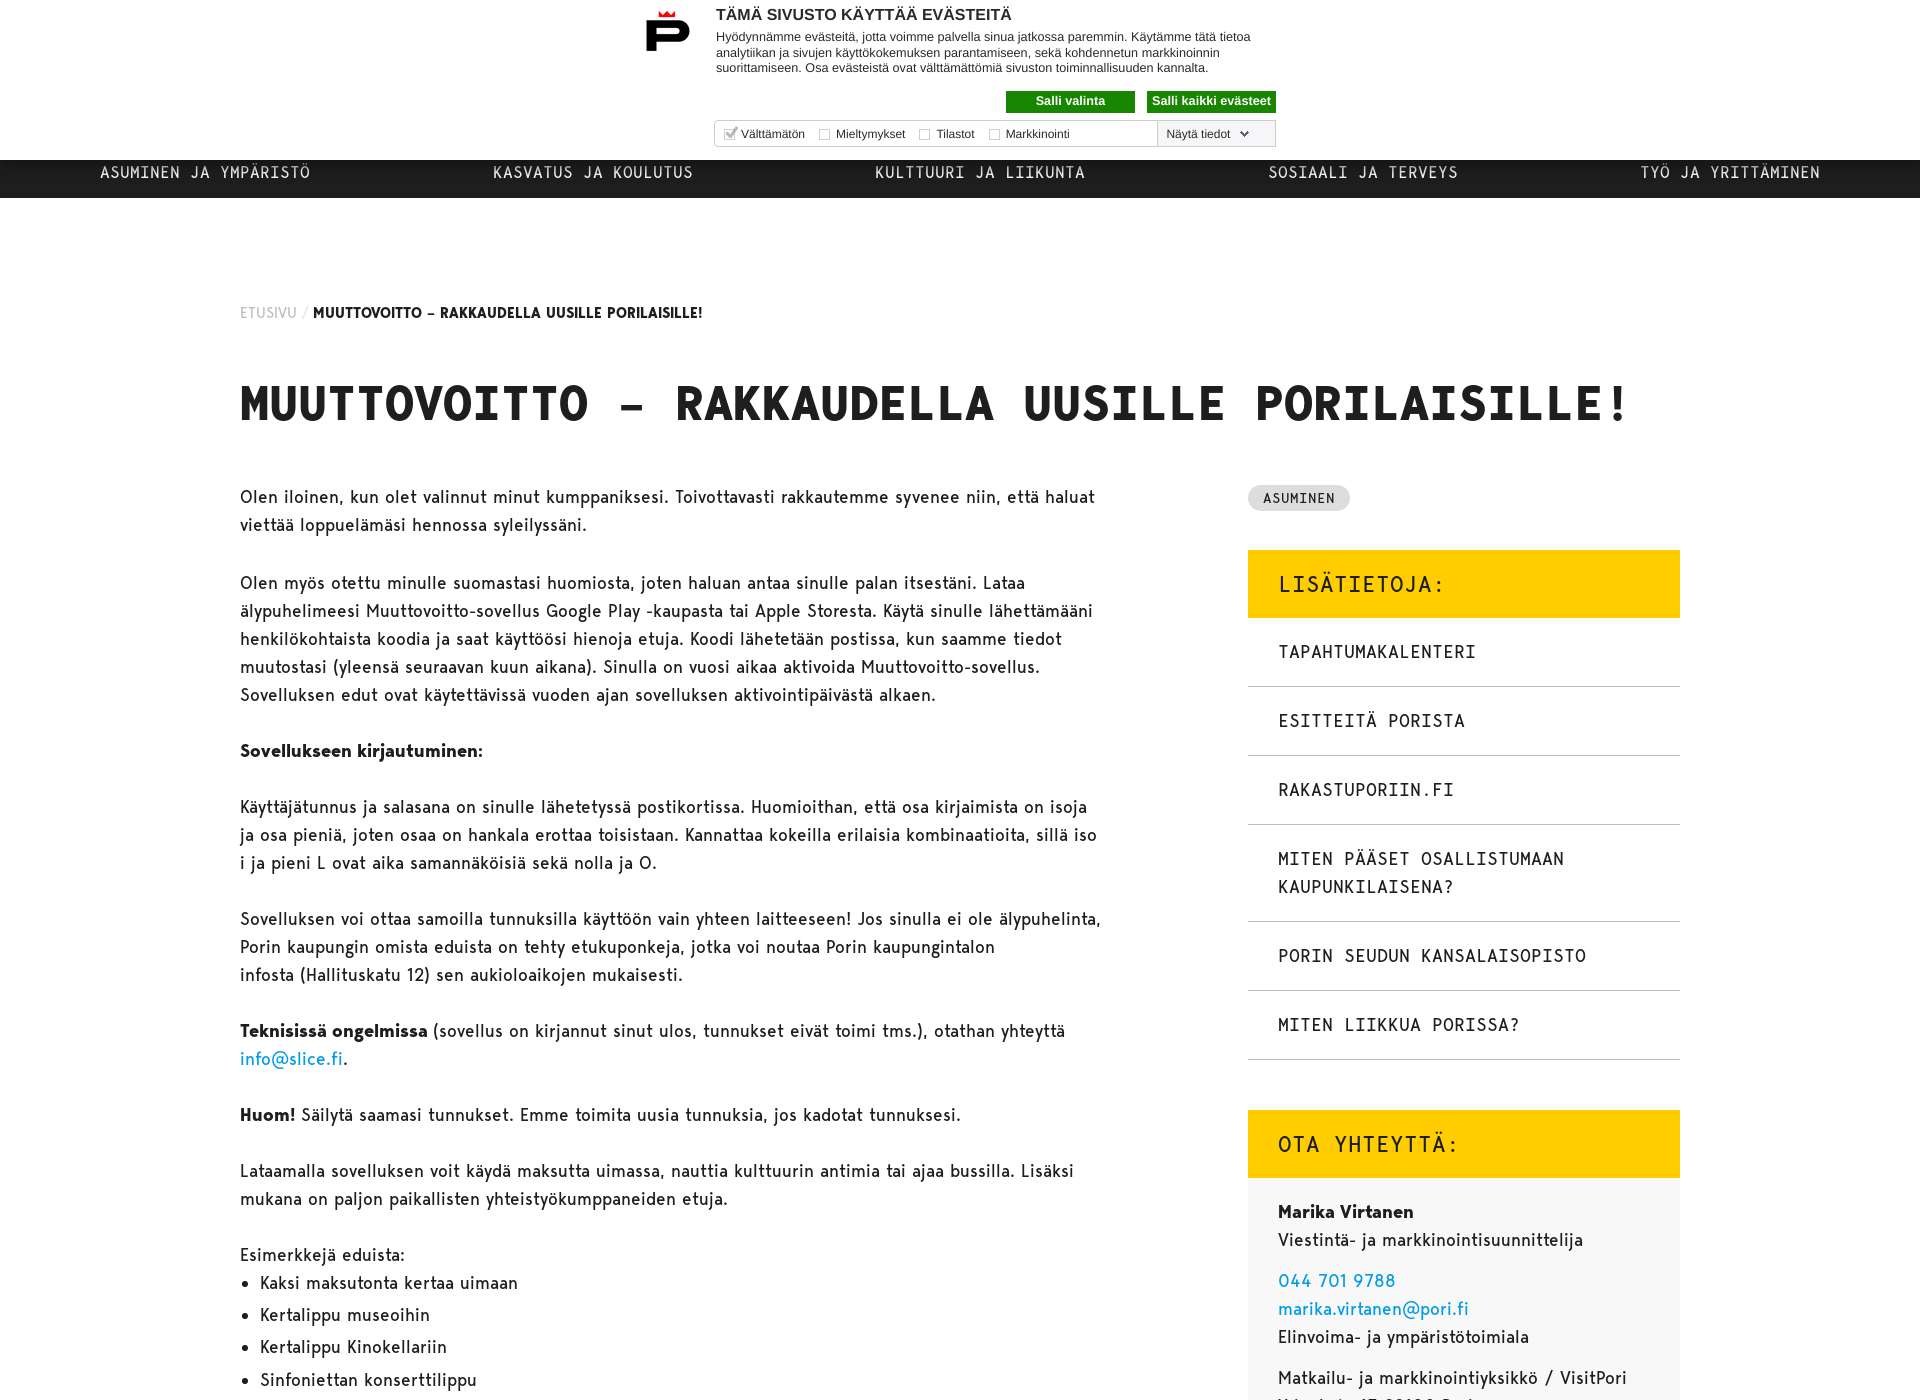 Screenshot for muuttovoitto.fi